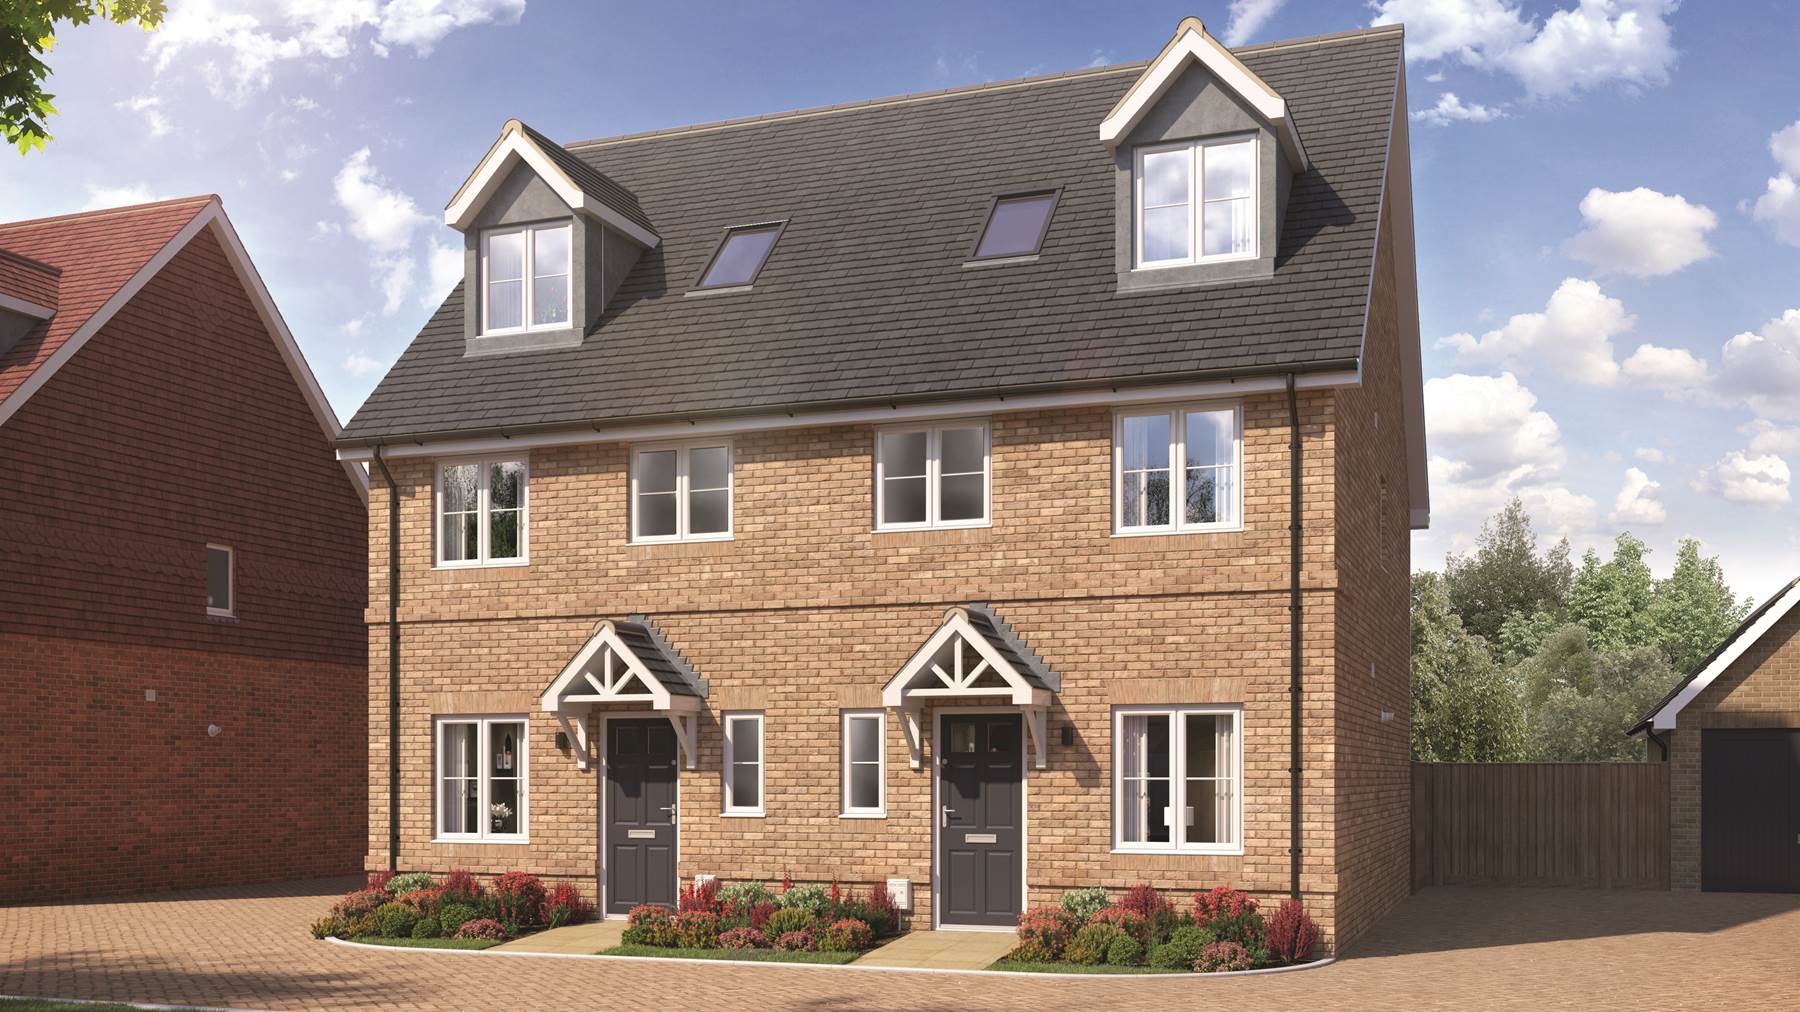 Computer Generated Image of 3 bedroom house for sale in Oxfordshire. Cala at Nobel Park, Didcot.